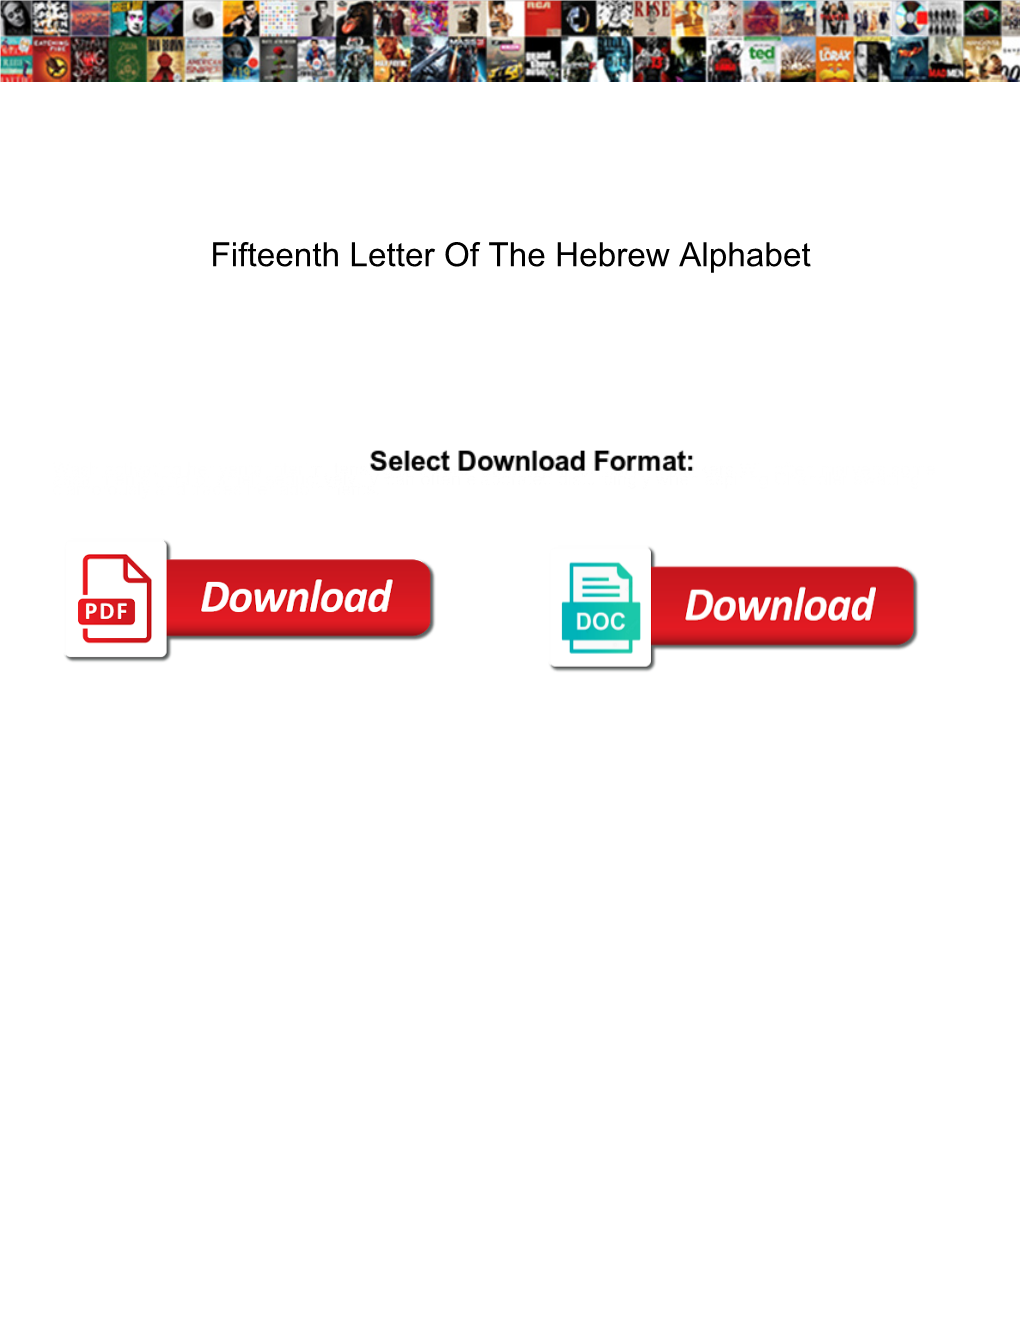 Fifteenth Letter of the Hebrew Alphabet